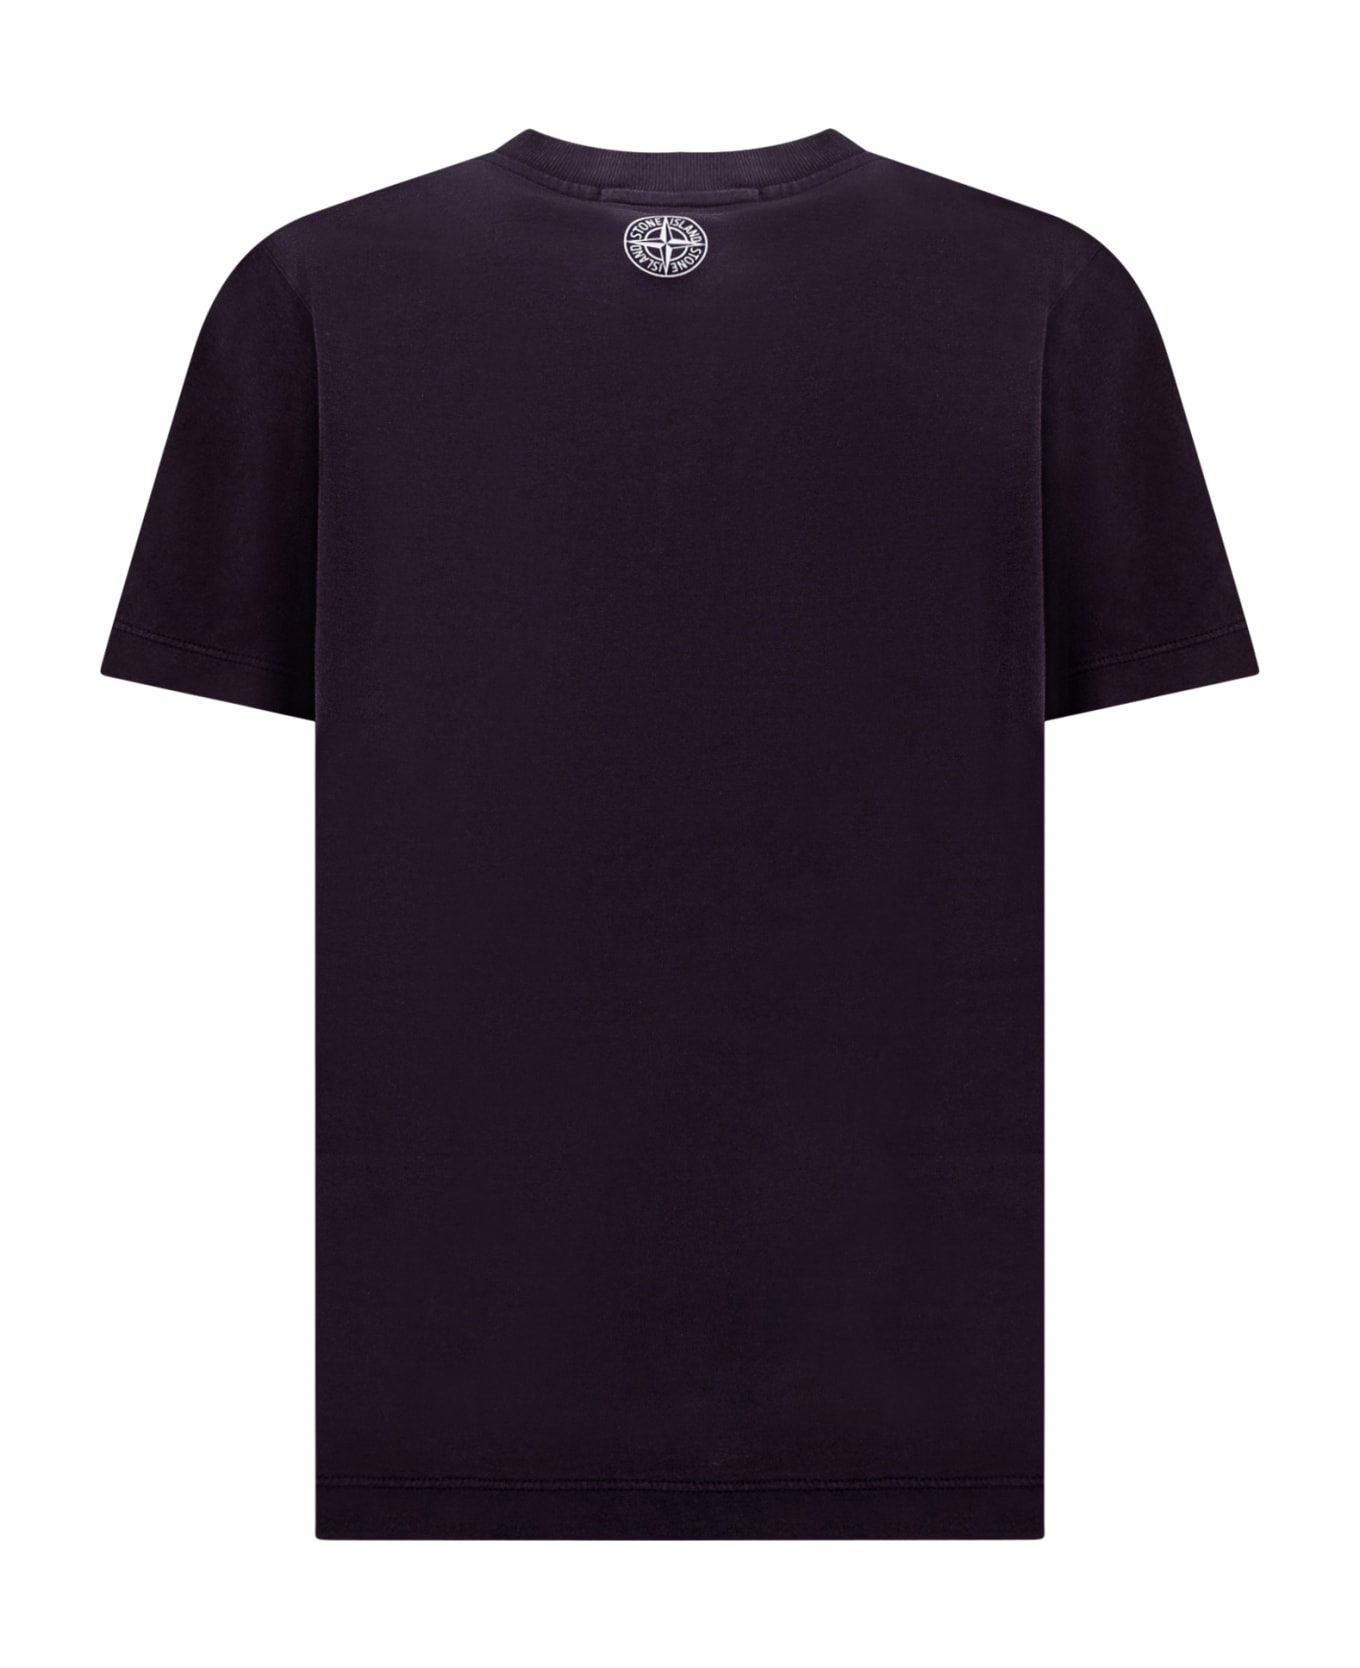 Stone Island Junior T-shirt With Logo - NAVY BLUE Tシャツ＆ポロシャツ